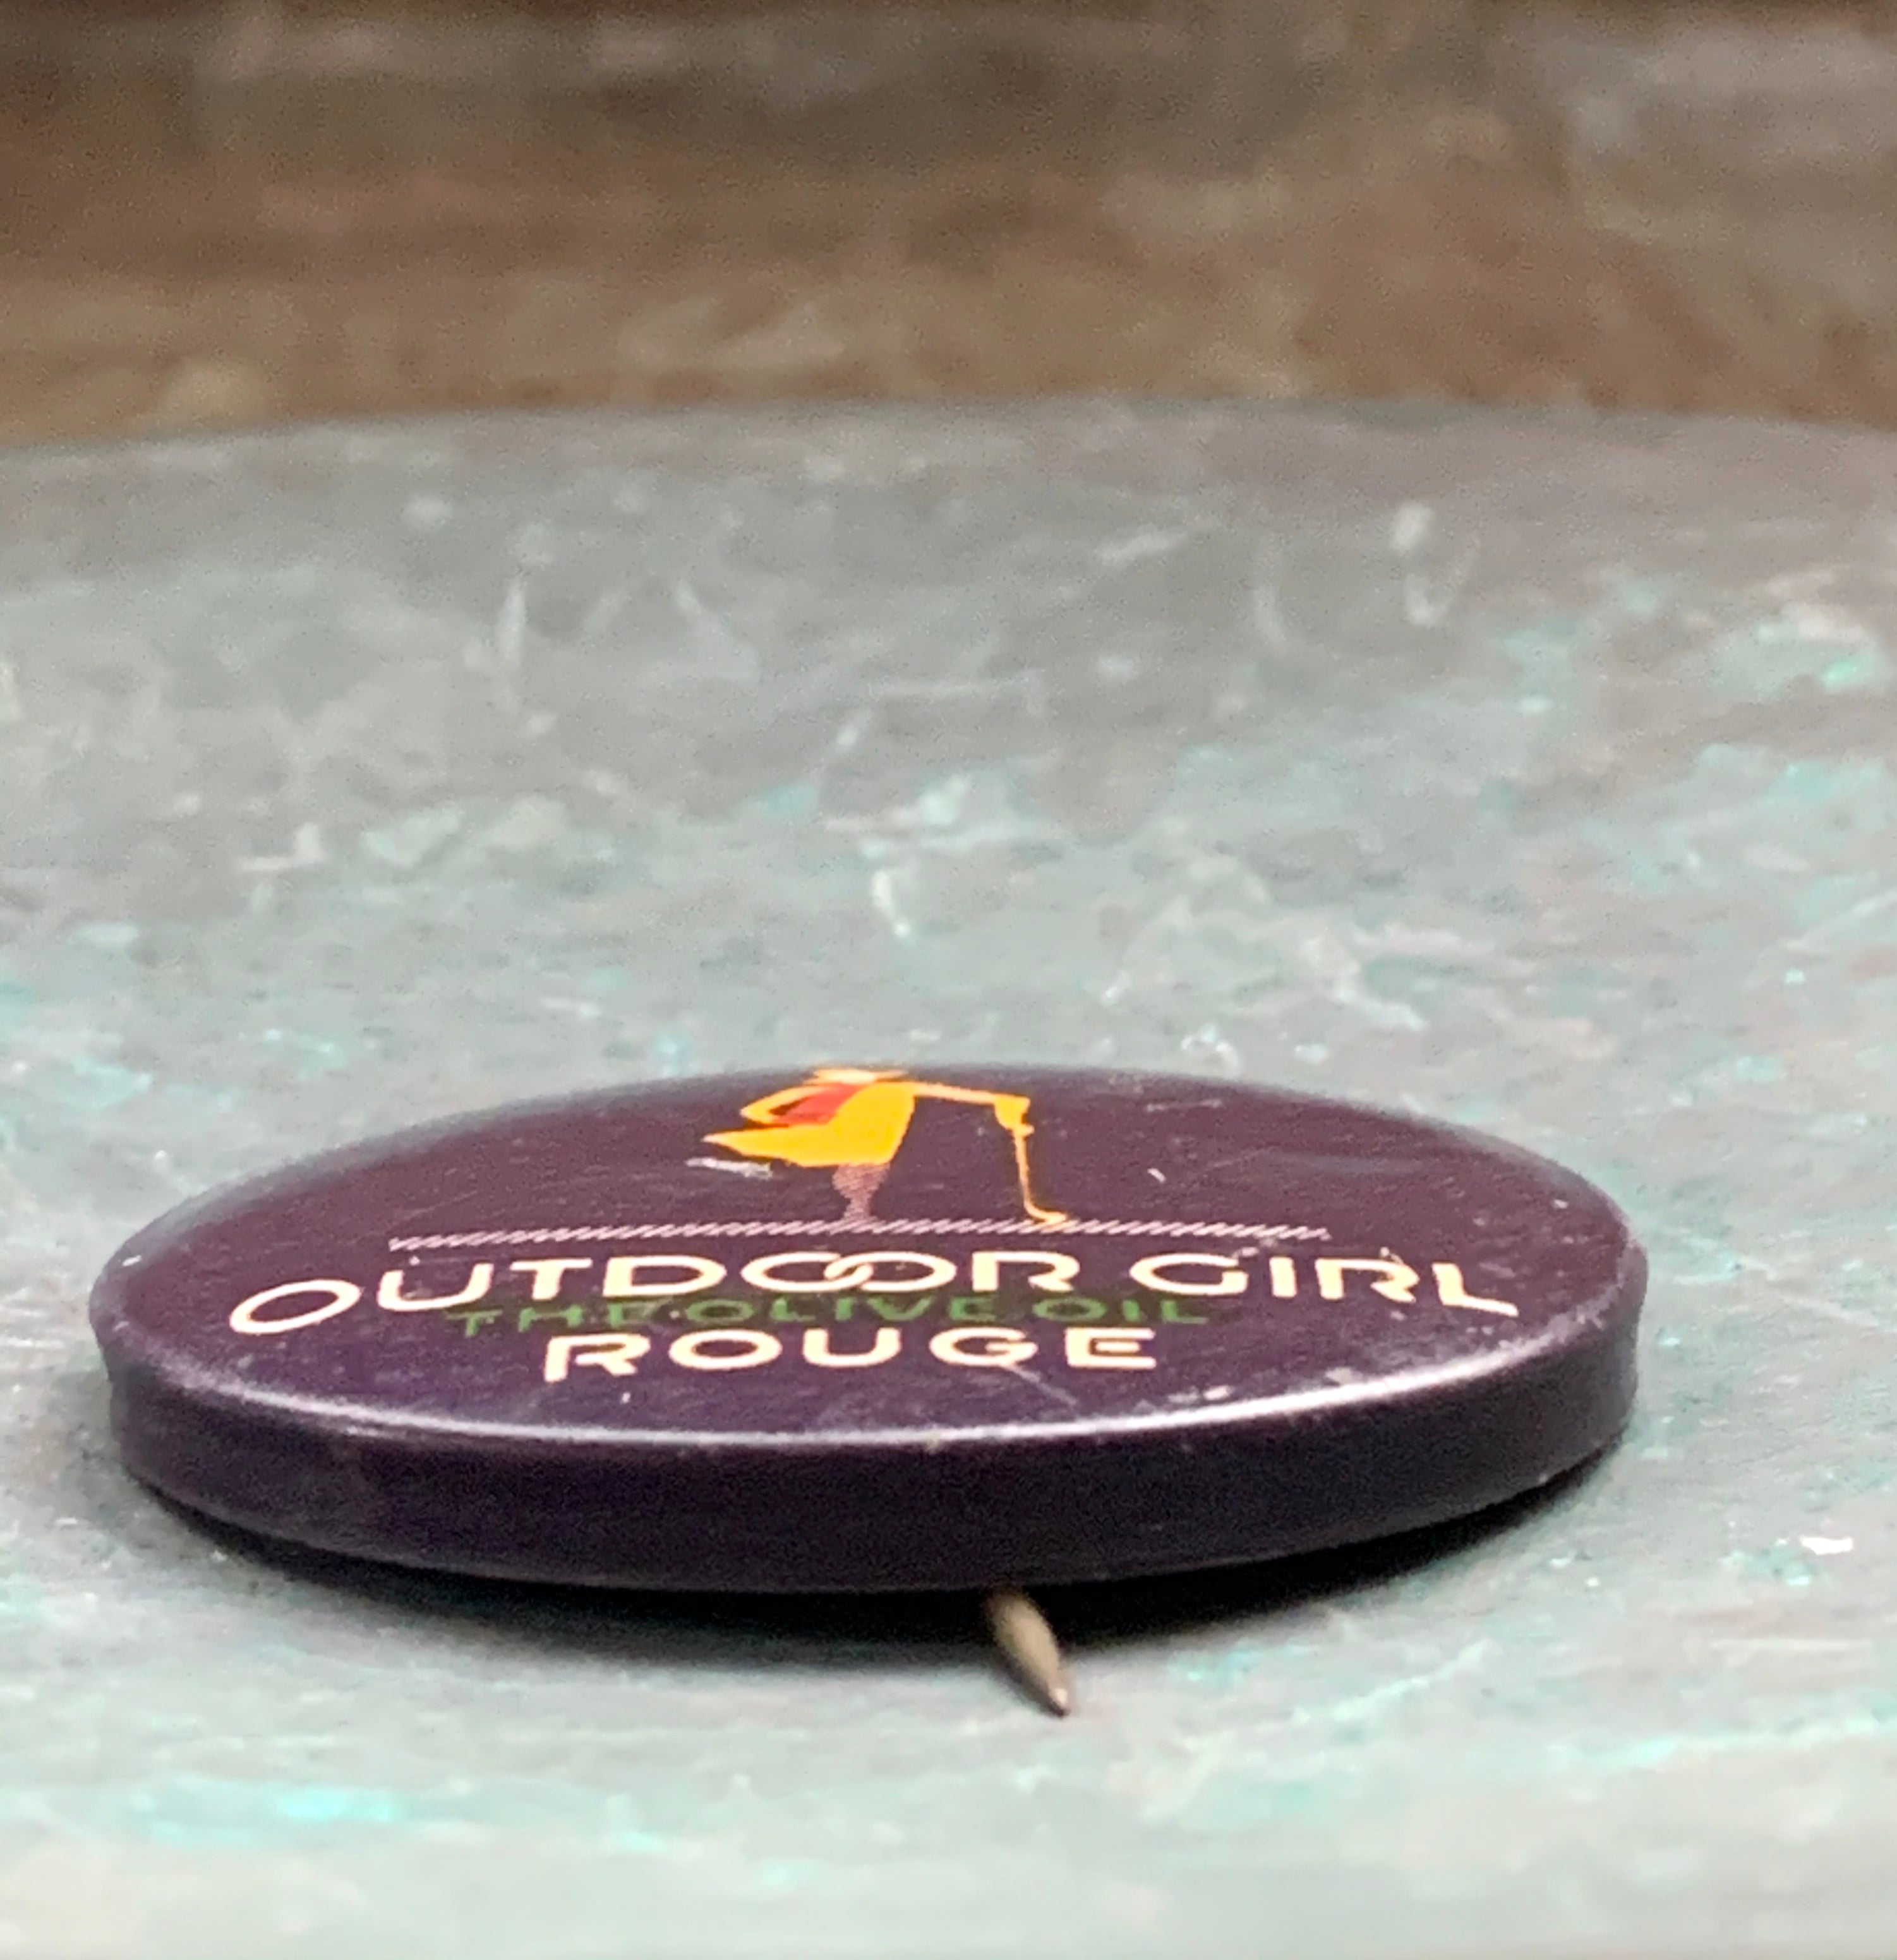 Vintage "Outdoor Girl, The Olive Oil Rouge " Pinback Button